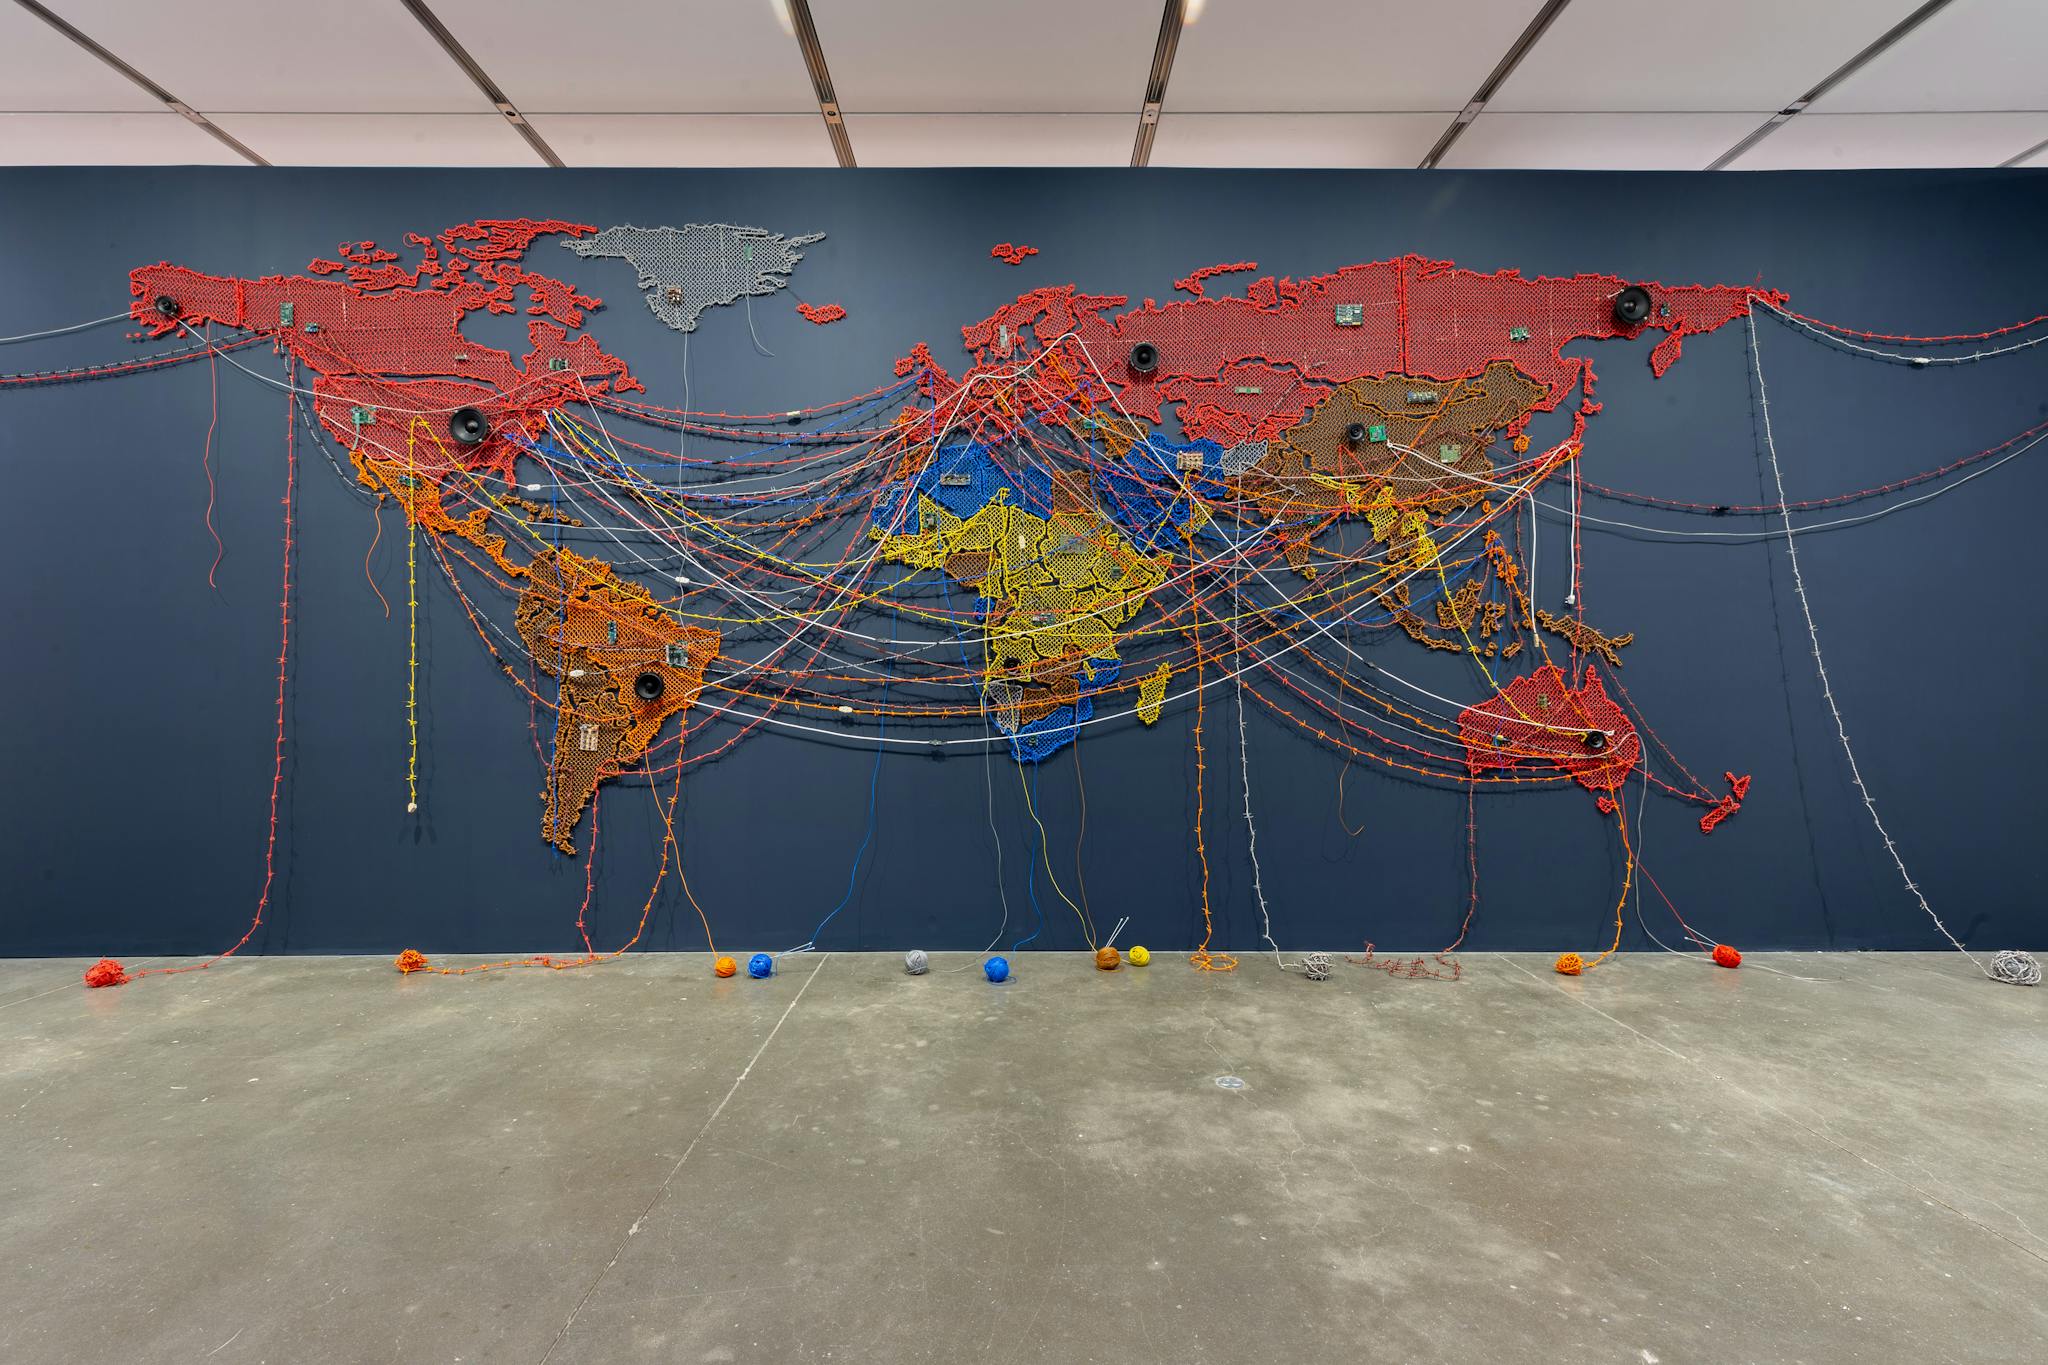 A colorful world map hangs from the wall, with threads linking different countries.